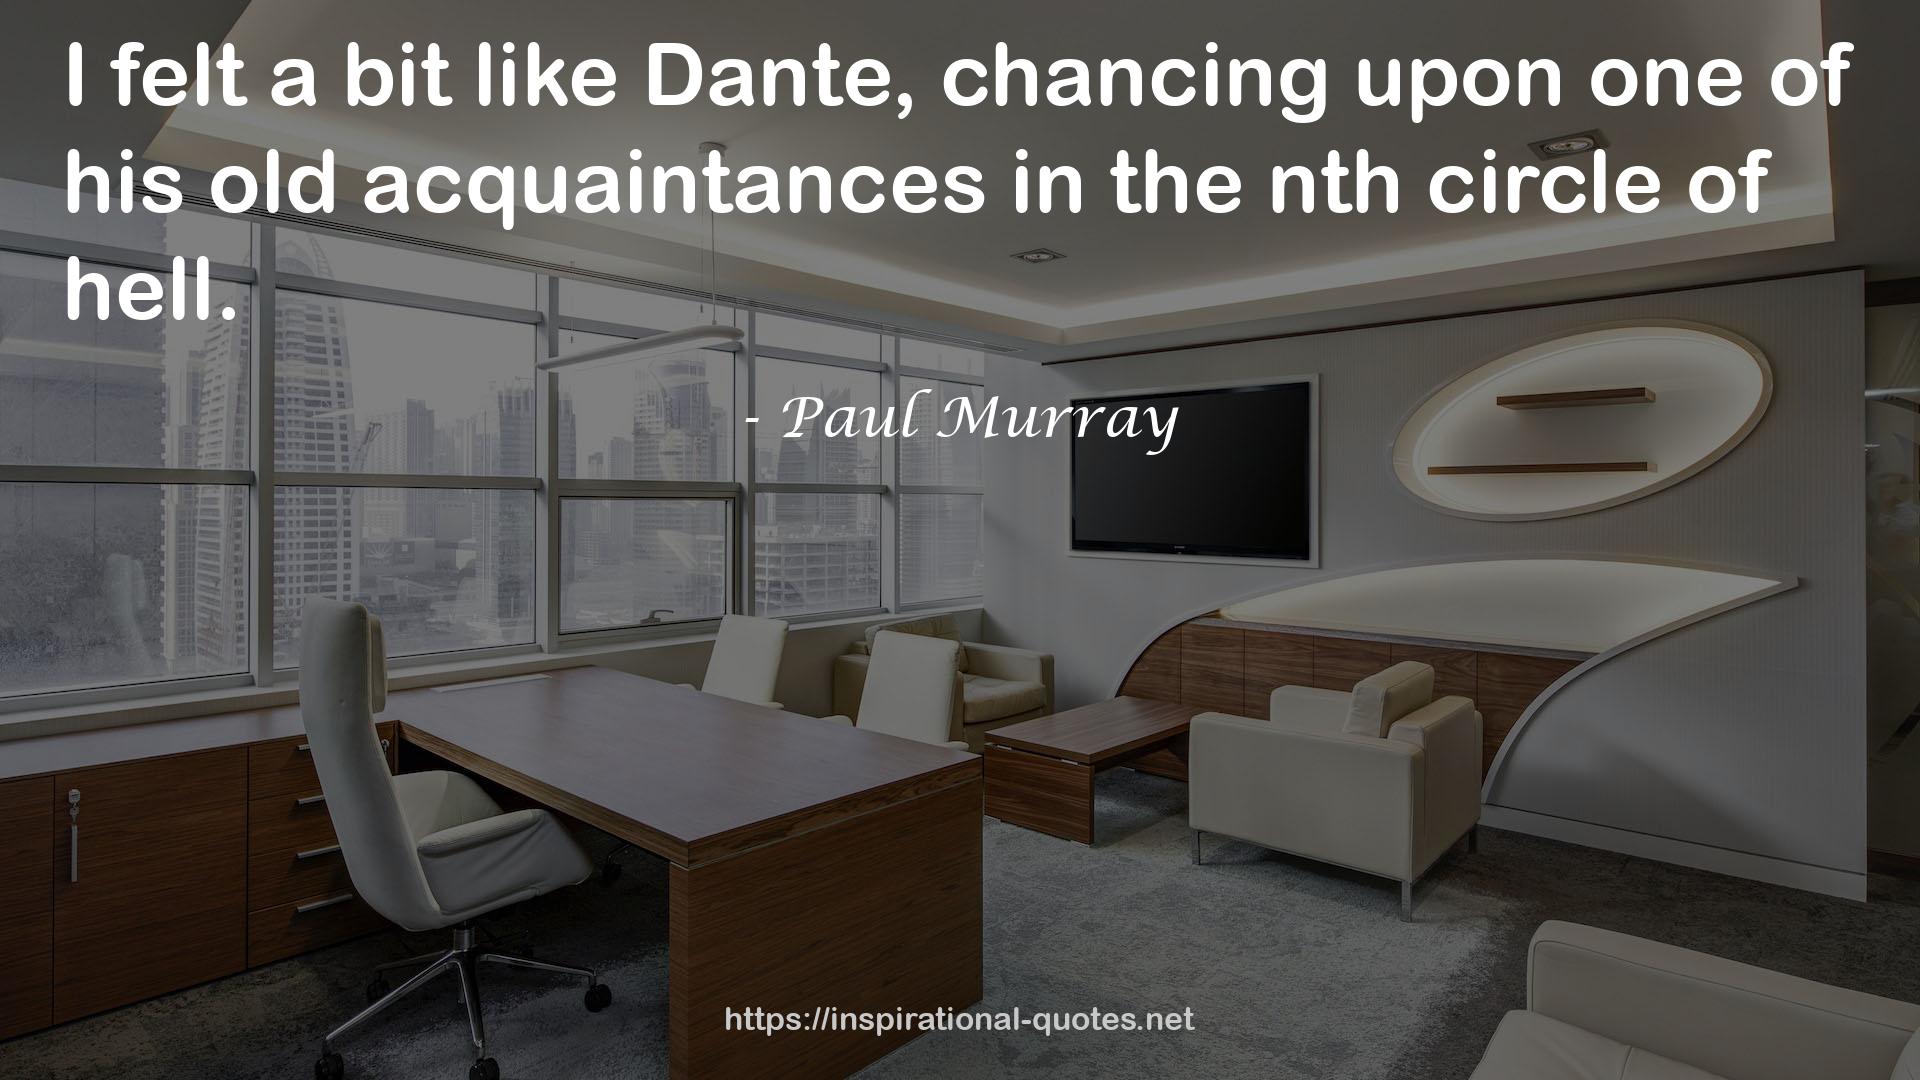 Paul Murray QUOTES